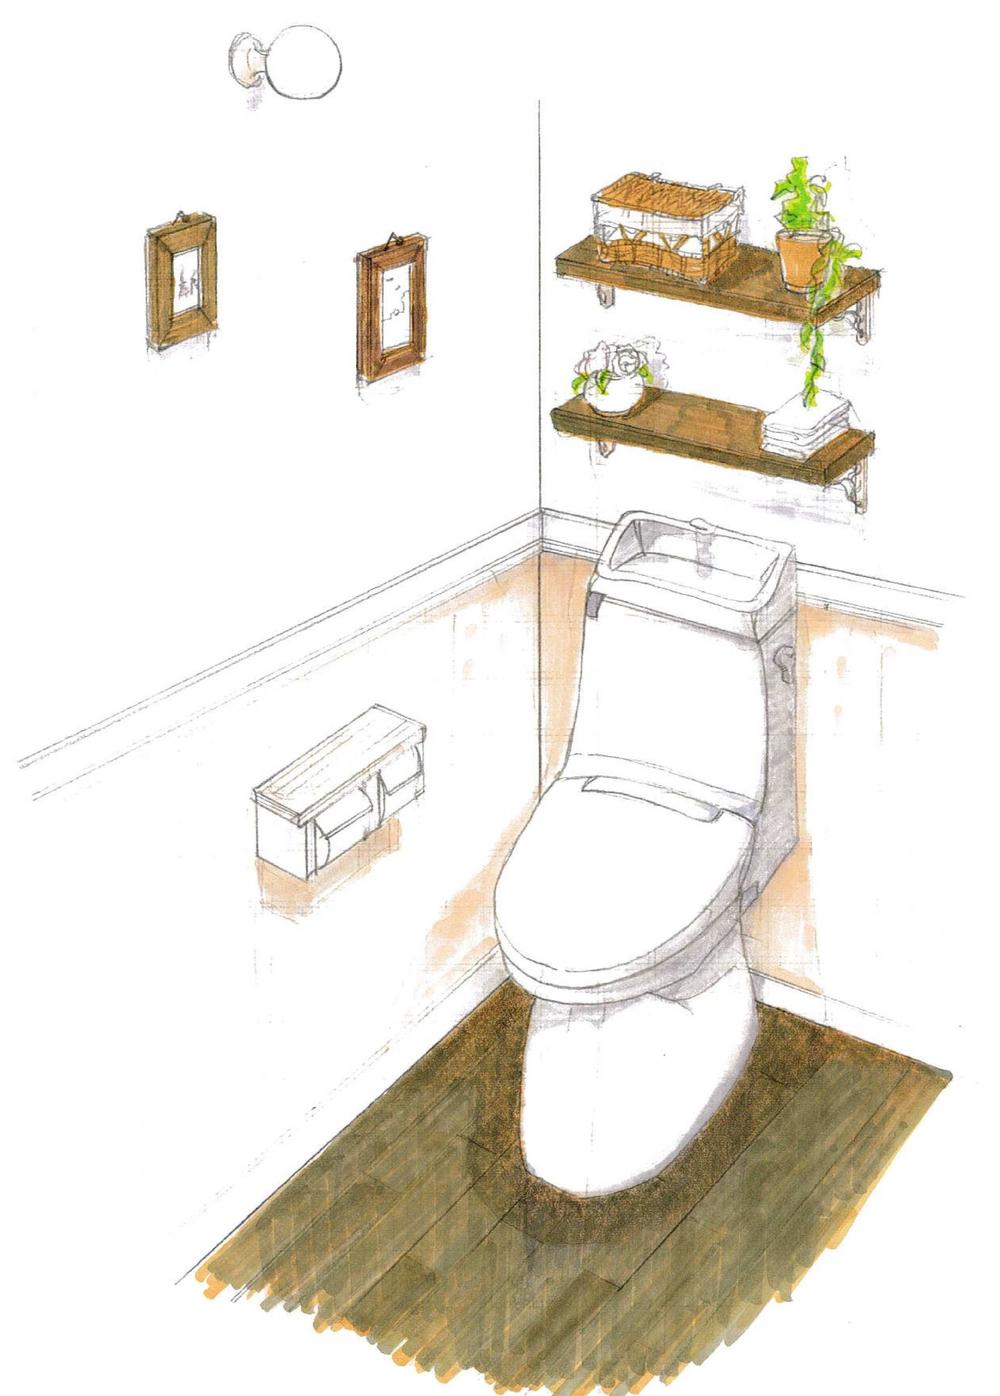 Rendering (introspection). New series "Le Bricolage (Le ・ Toilet image view of bricolage) "